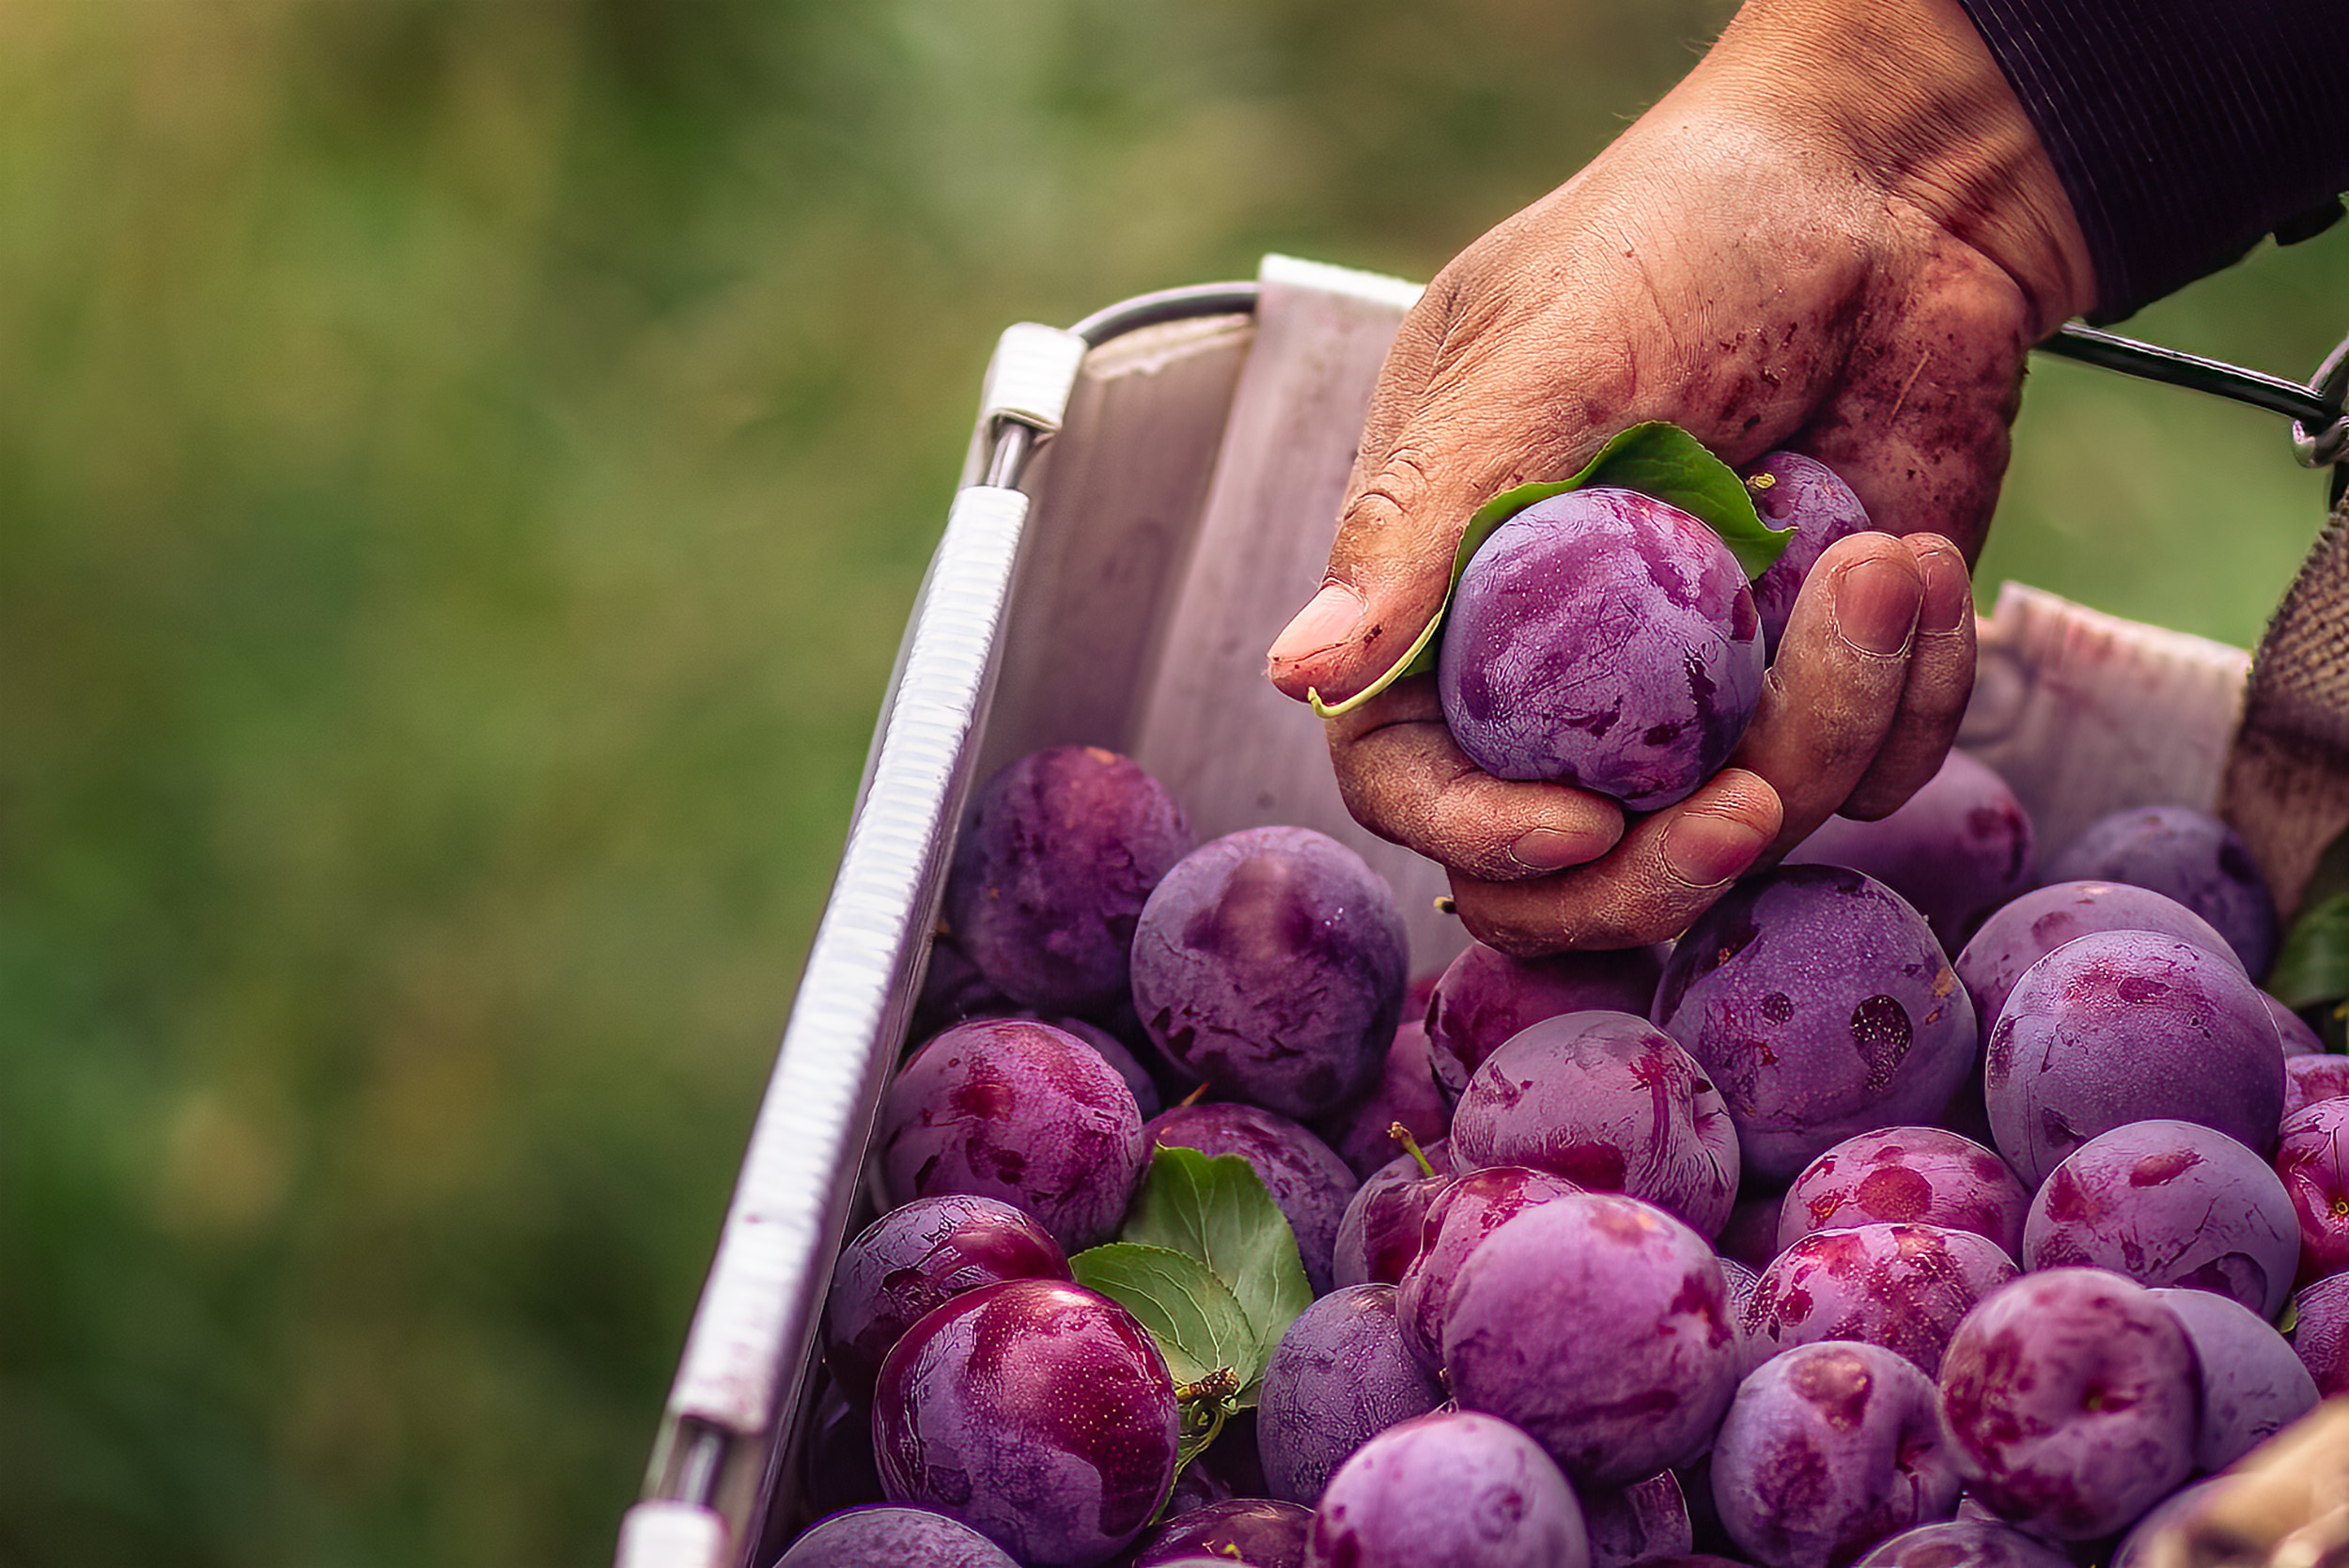 Crop worker hands and plums in a picker